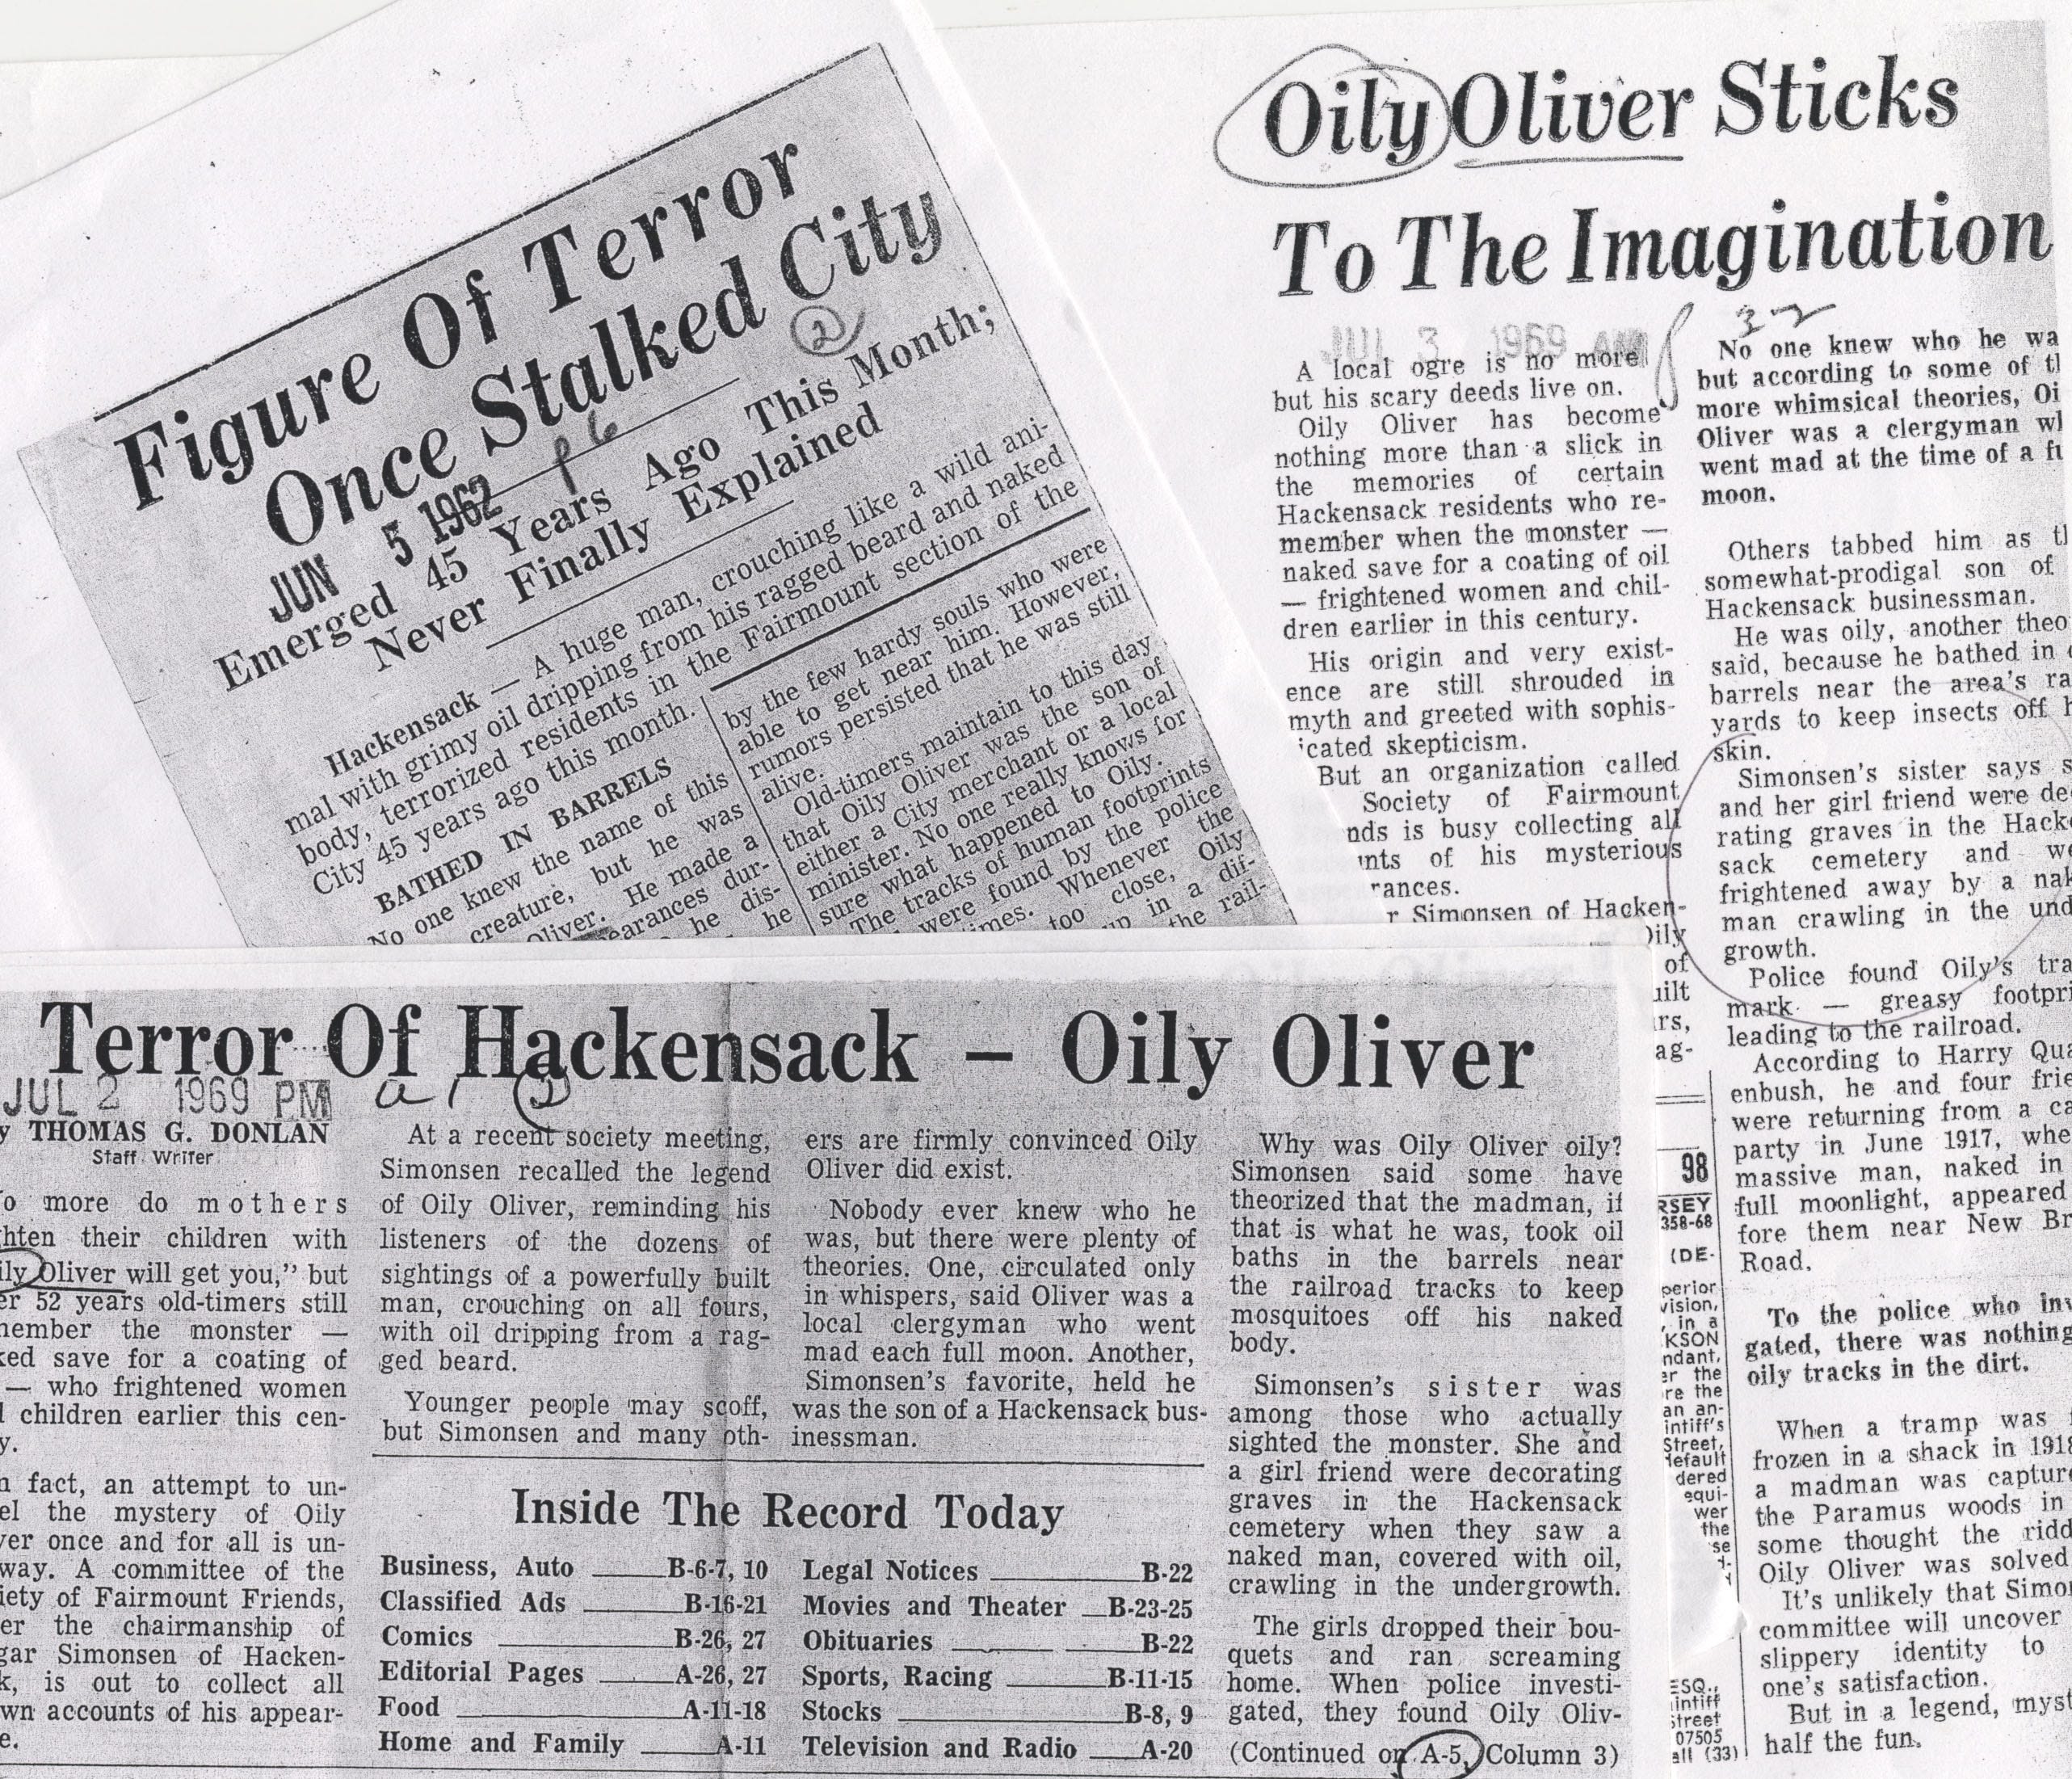 Oily Oliver once made headlines